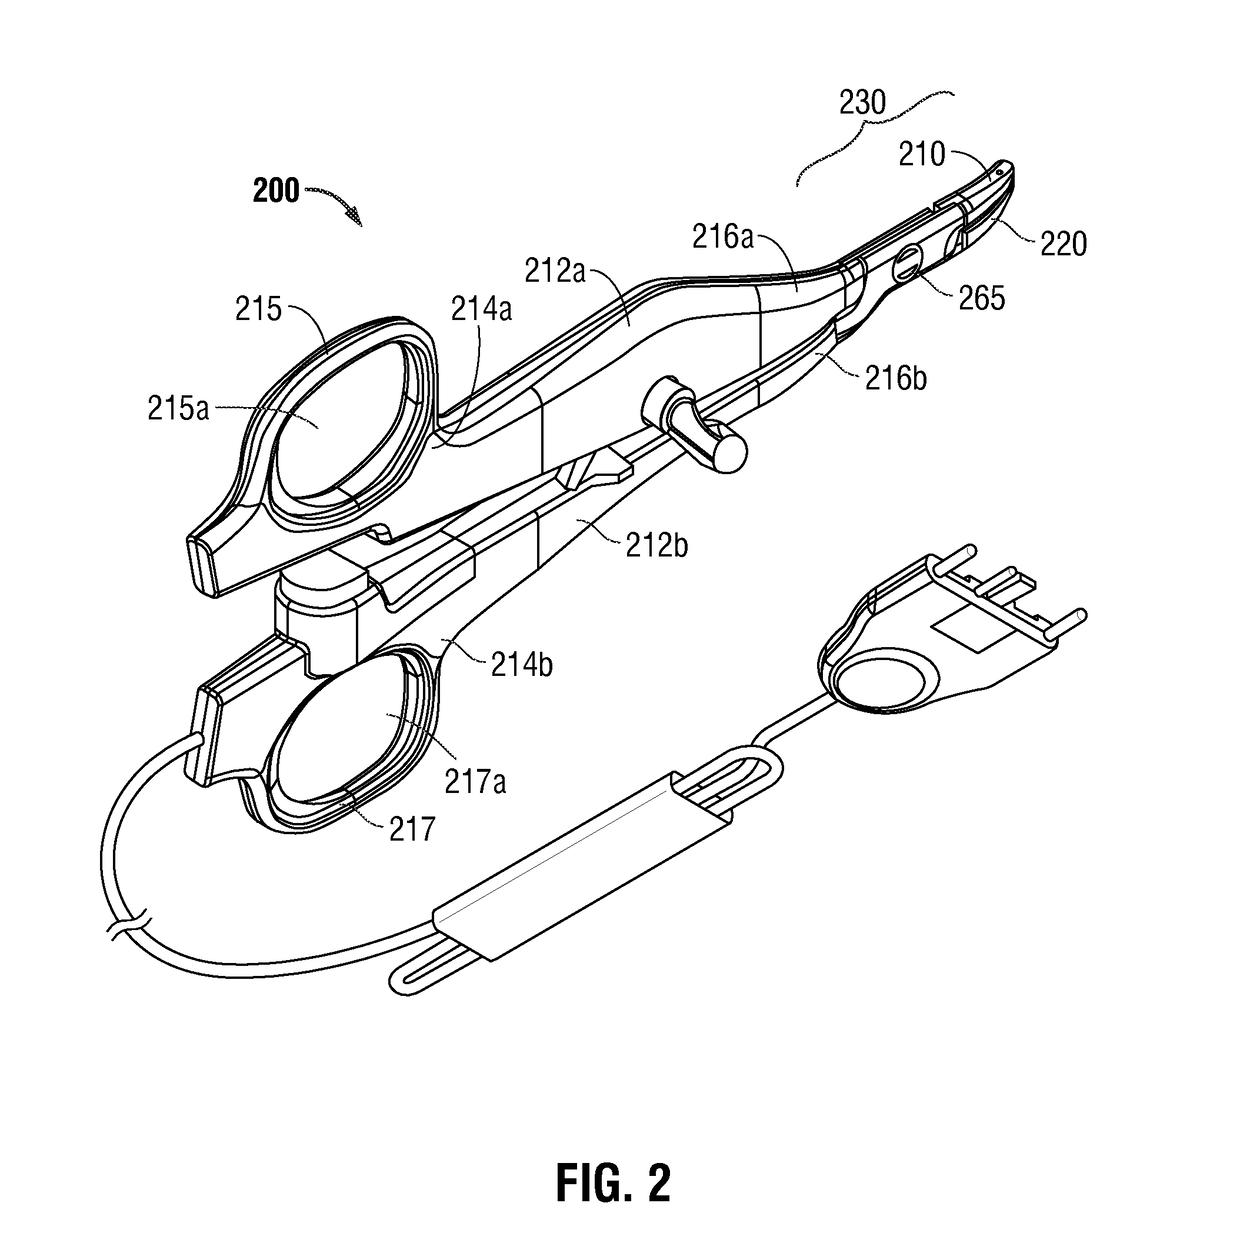 Non-stick coated electrosurgical instruments and method for manufacturing the same